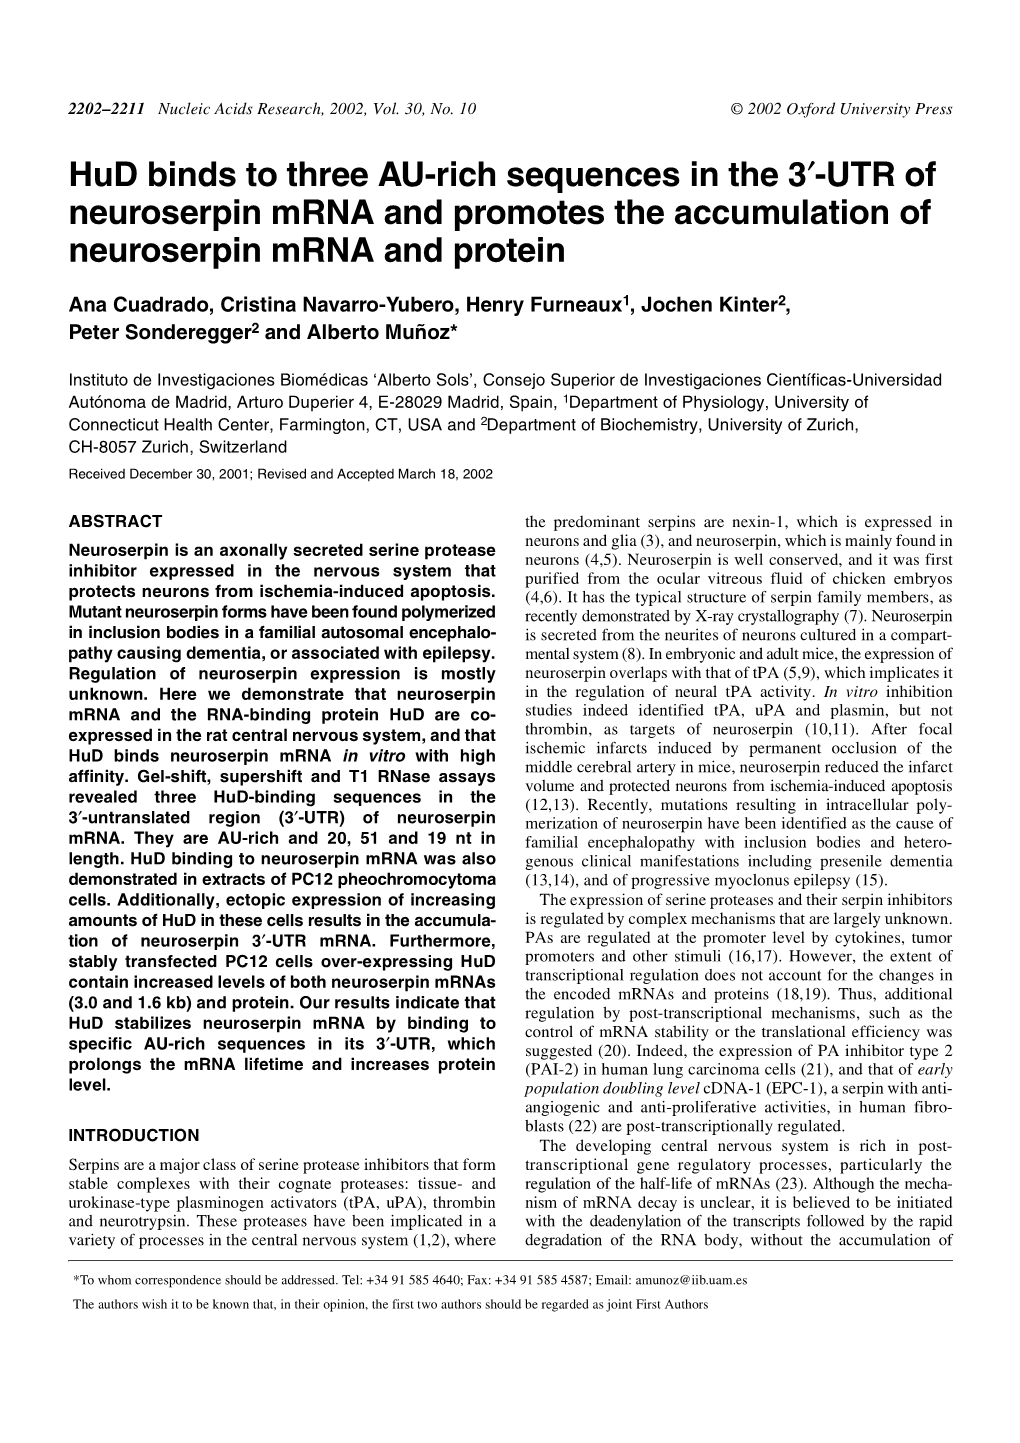 Hud Binds to Three AU-Rich Sequences in the 3′-UTR of Neuroserpin Mrna and Promotes the Accumulation of Neuroserpin Mrna and Protein